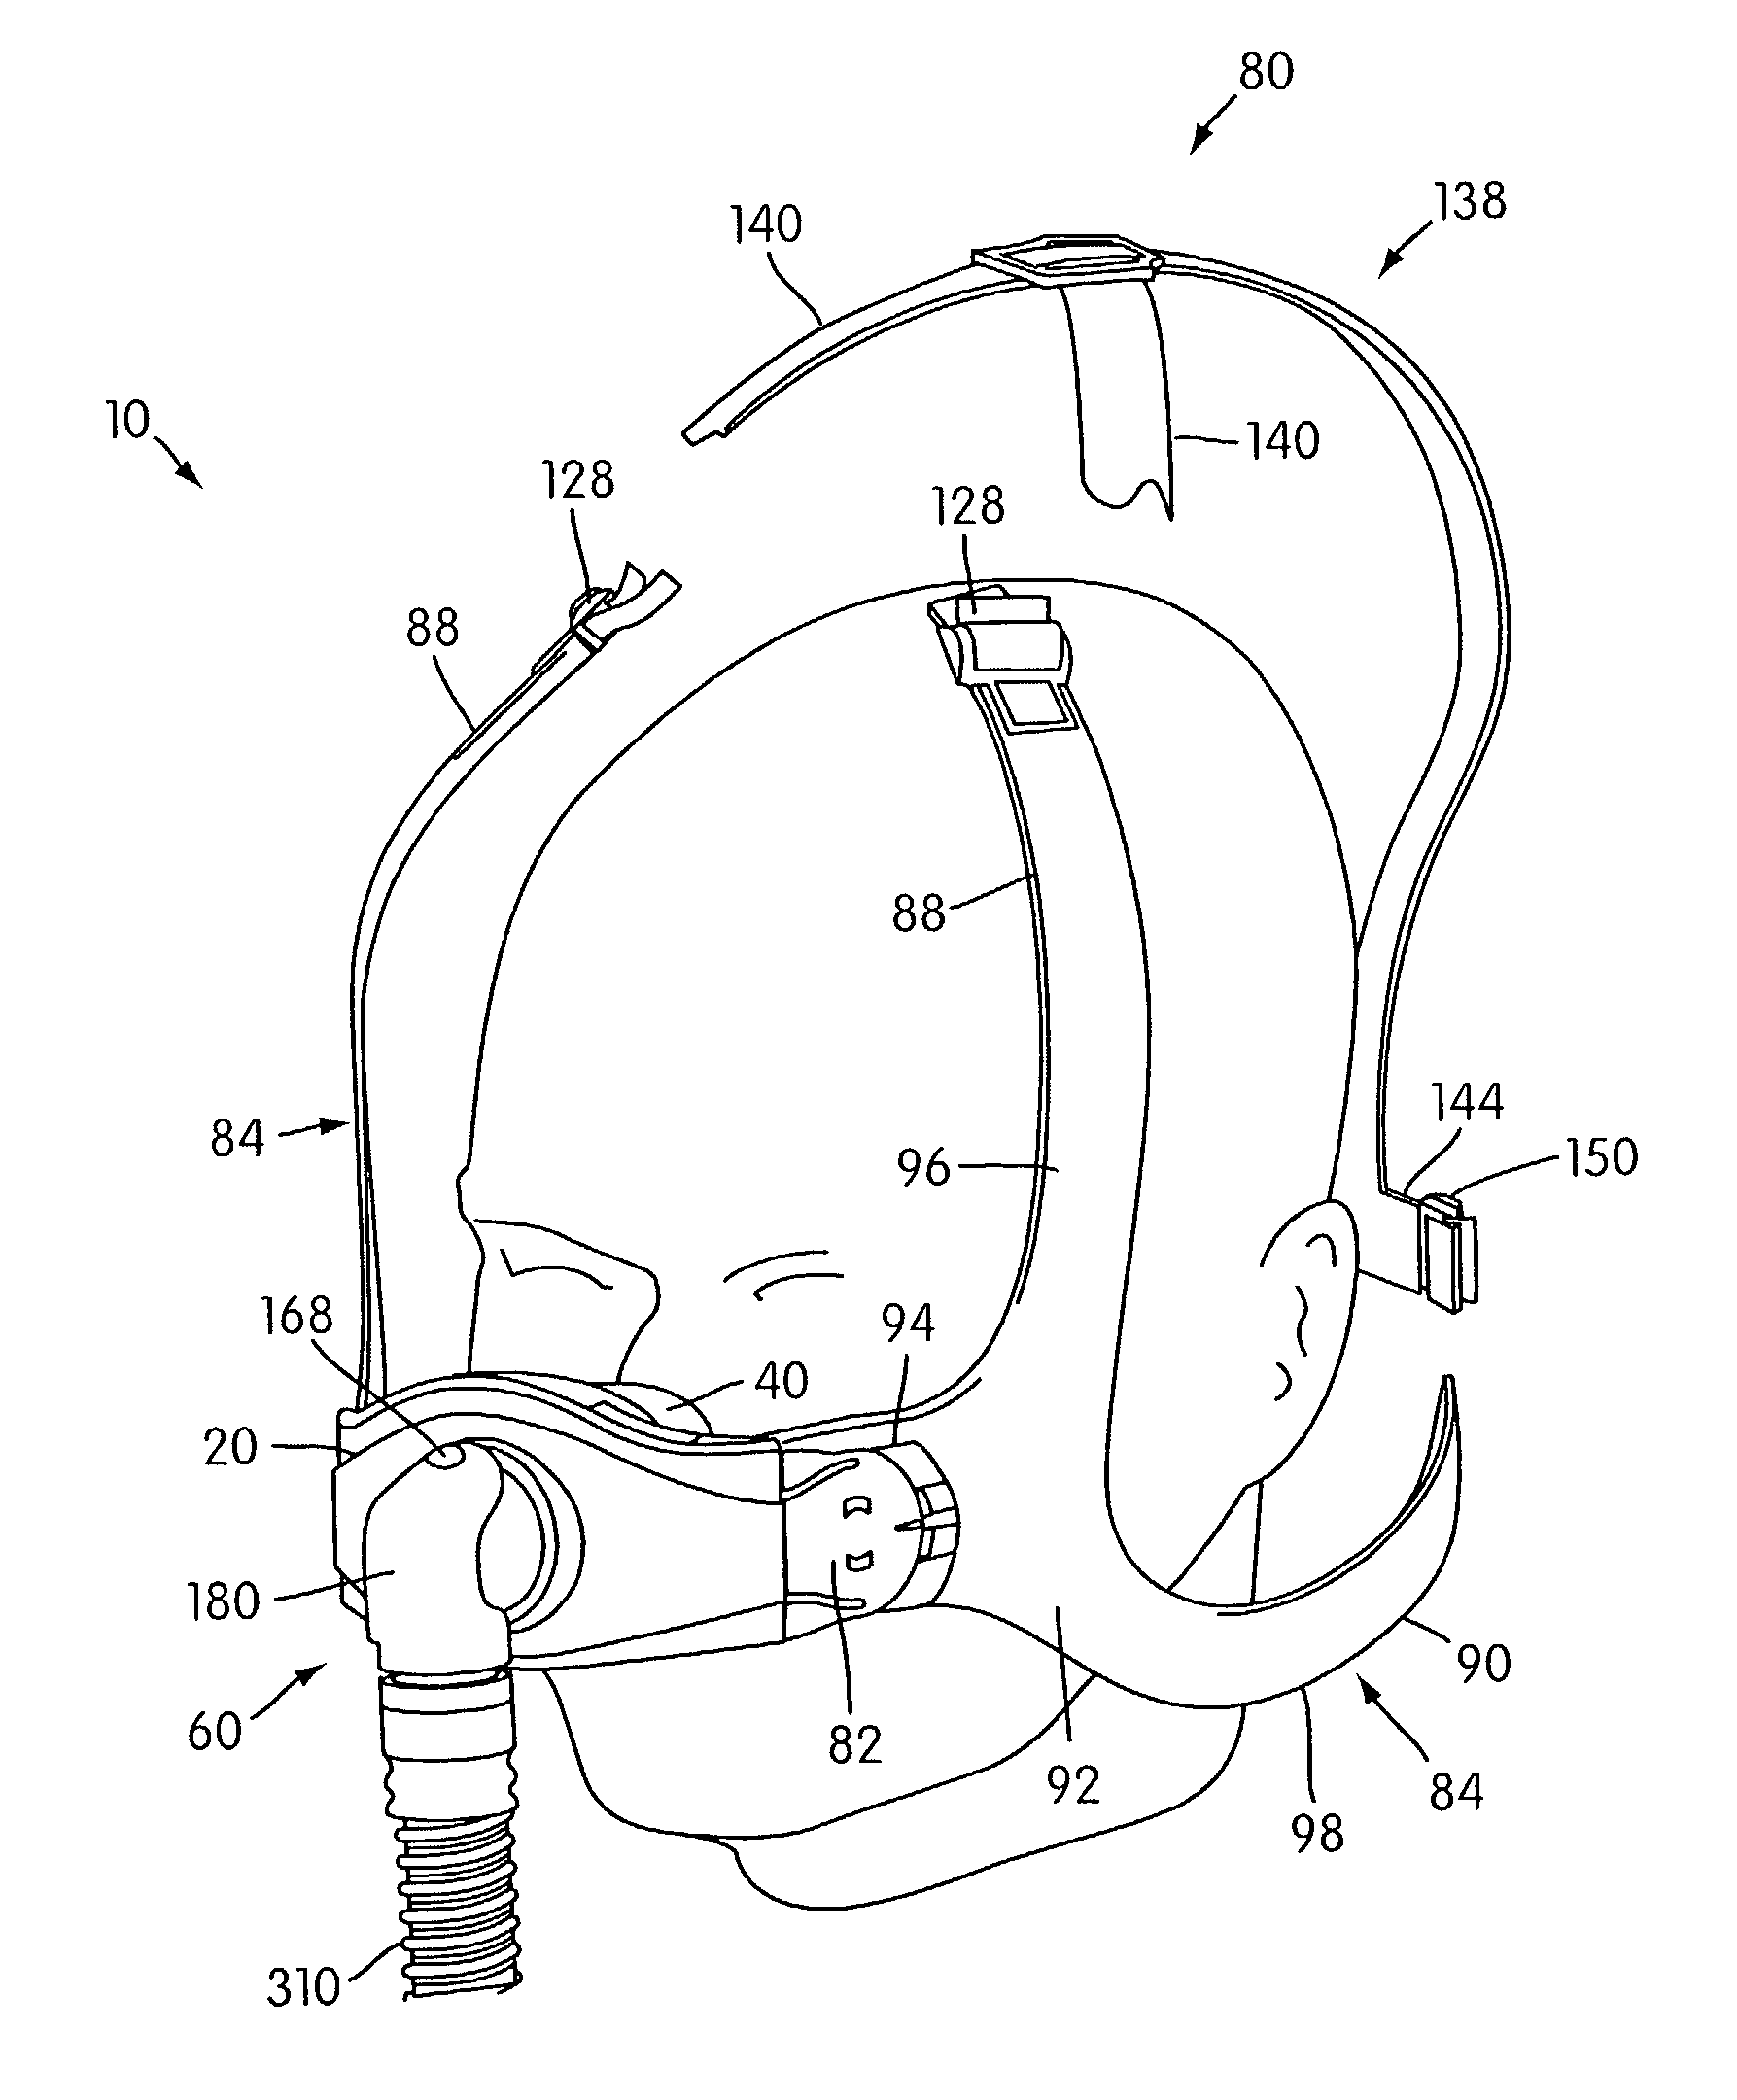 Ergonomic and adjustable respiratory mask assembly with frame